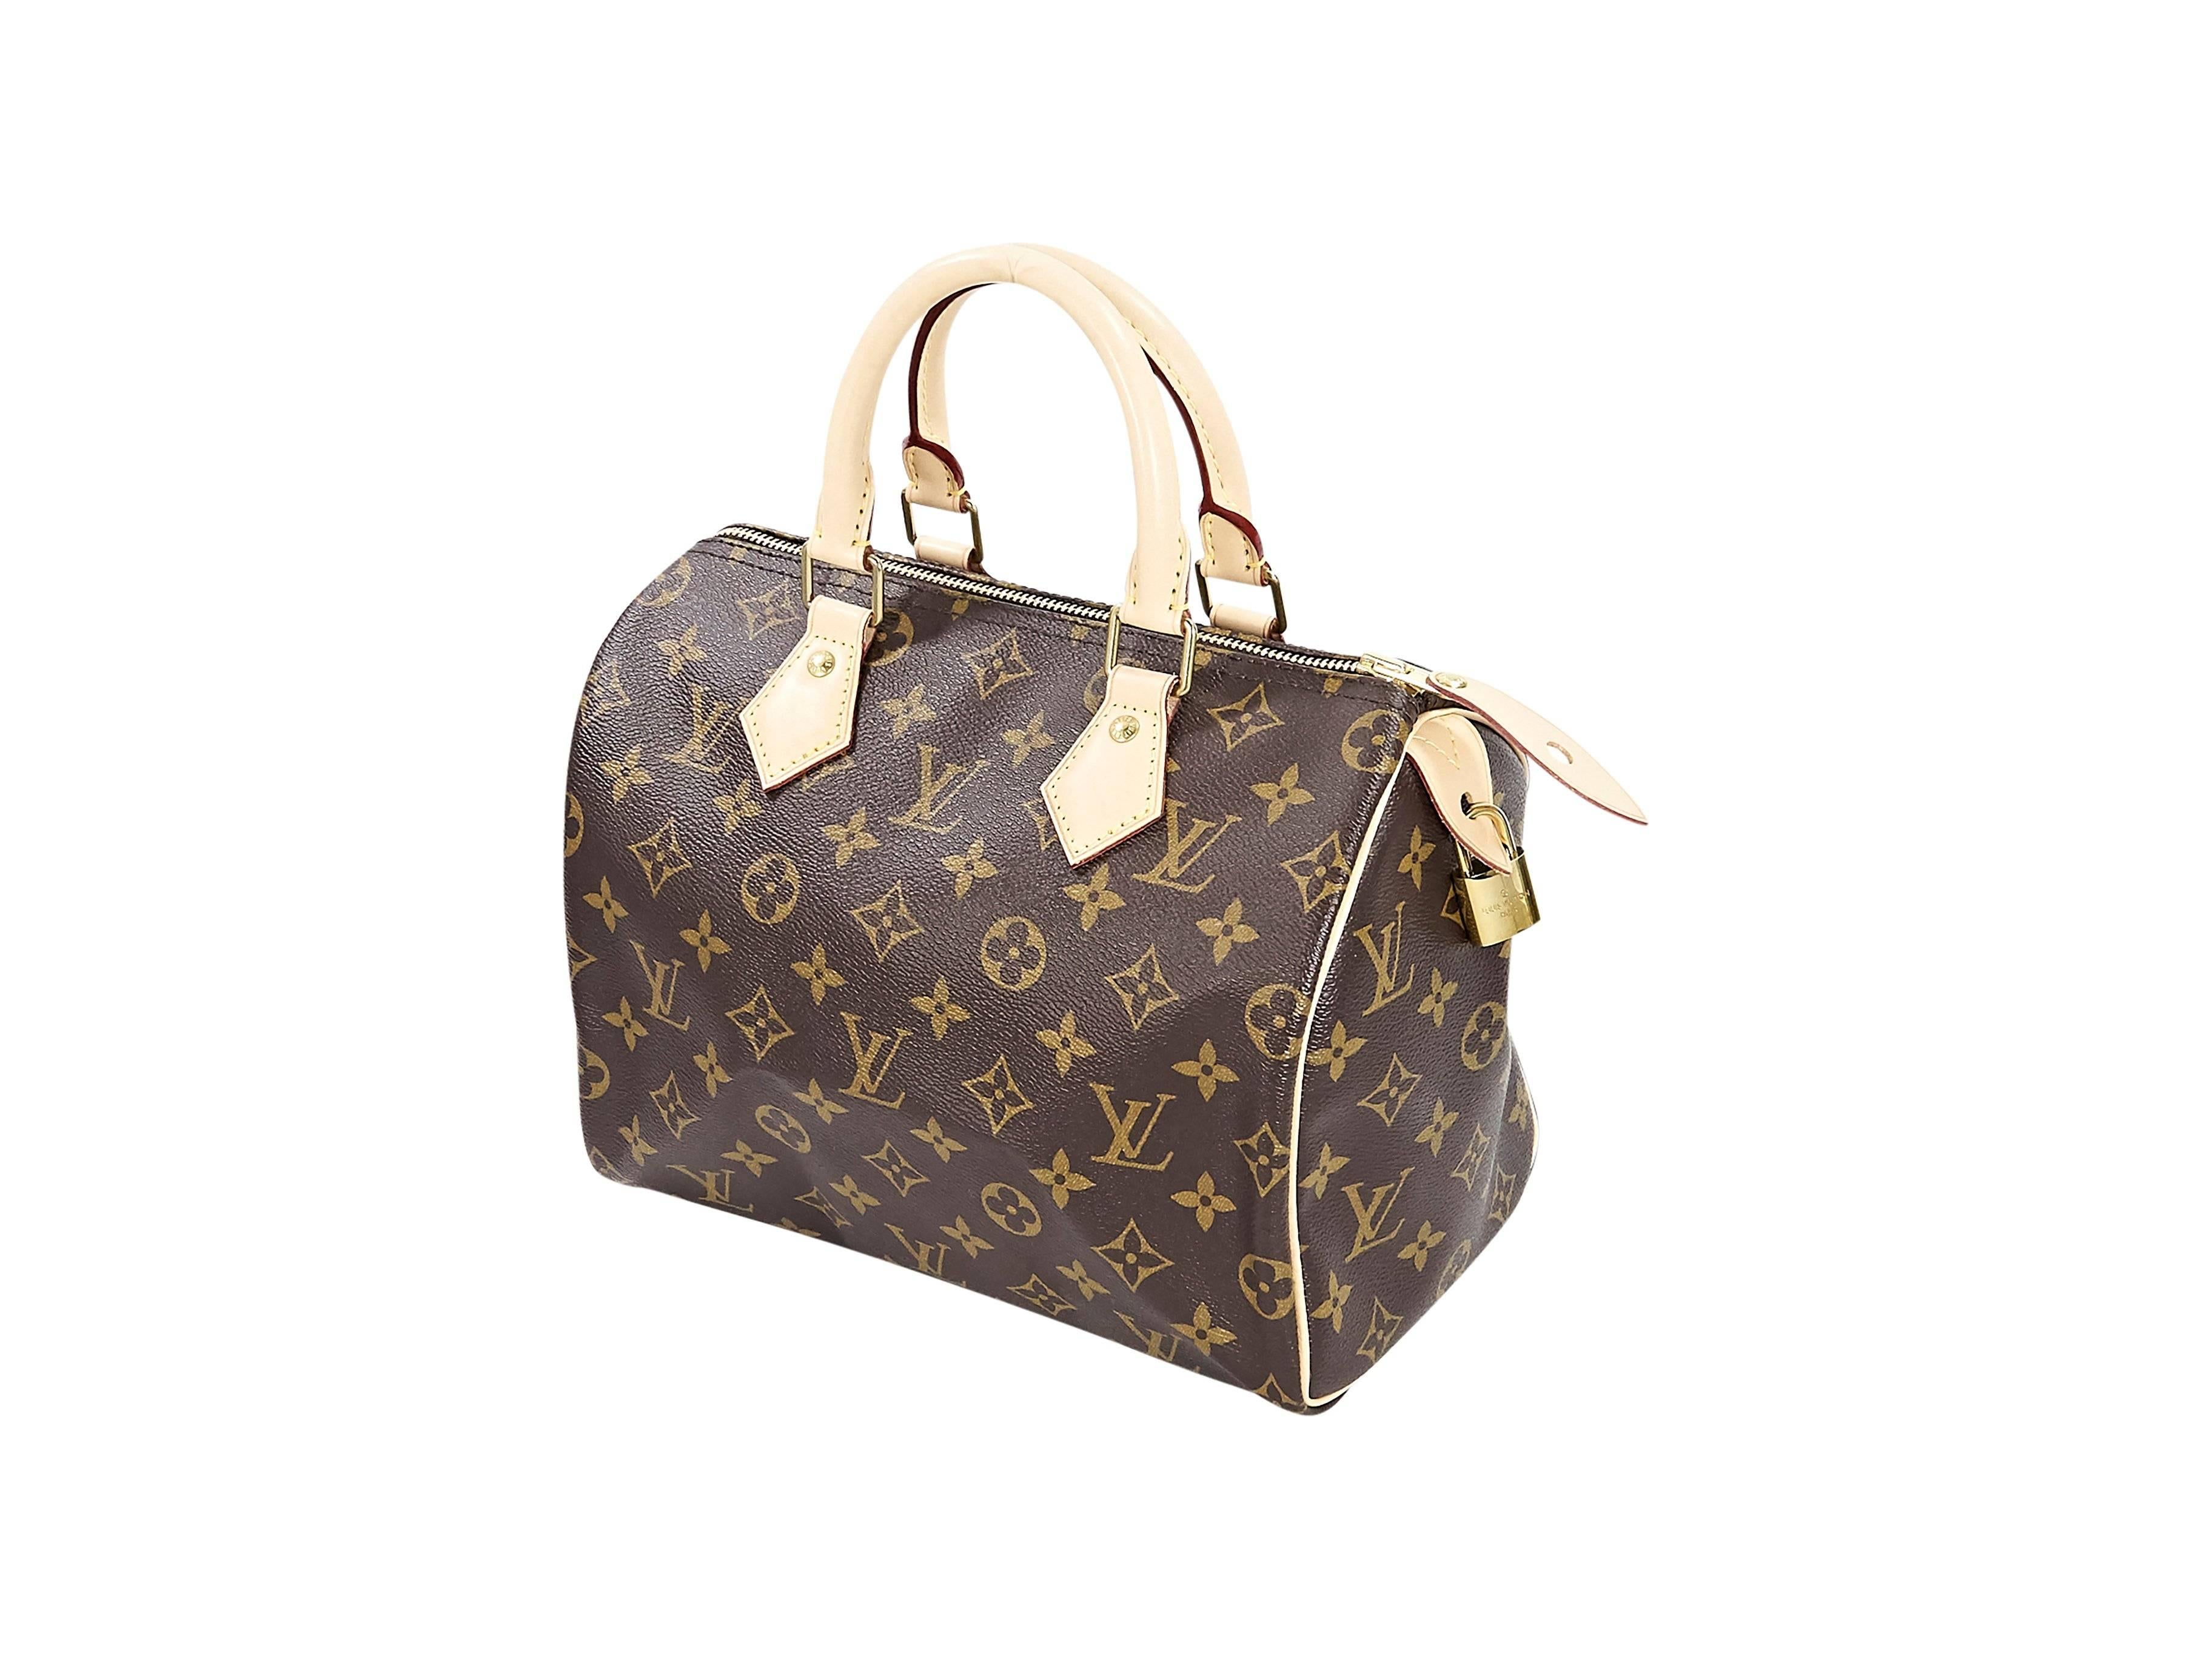 Product details:  Brown monogram Speedy 25 handbag by Louis Vuitton.  Top leather carry handles.  Top zip closure.  Lined interior with inner zip pocket.  Goldtone hardware.  10